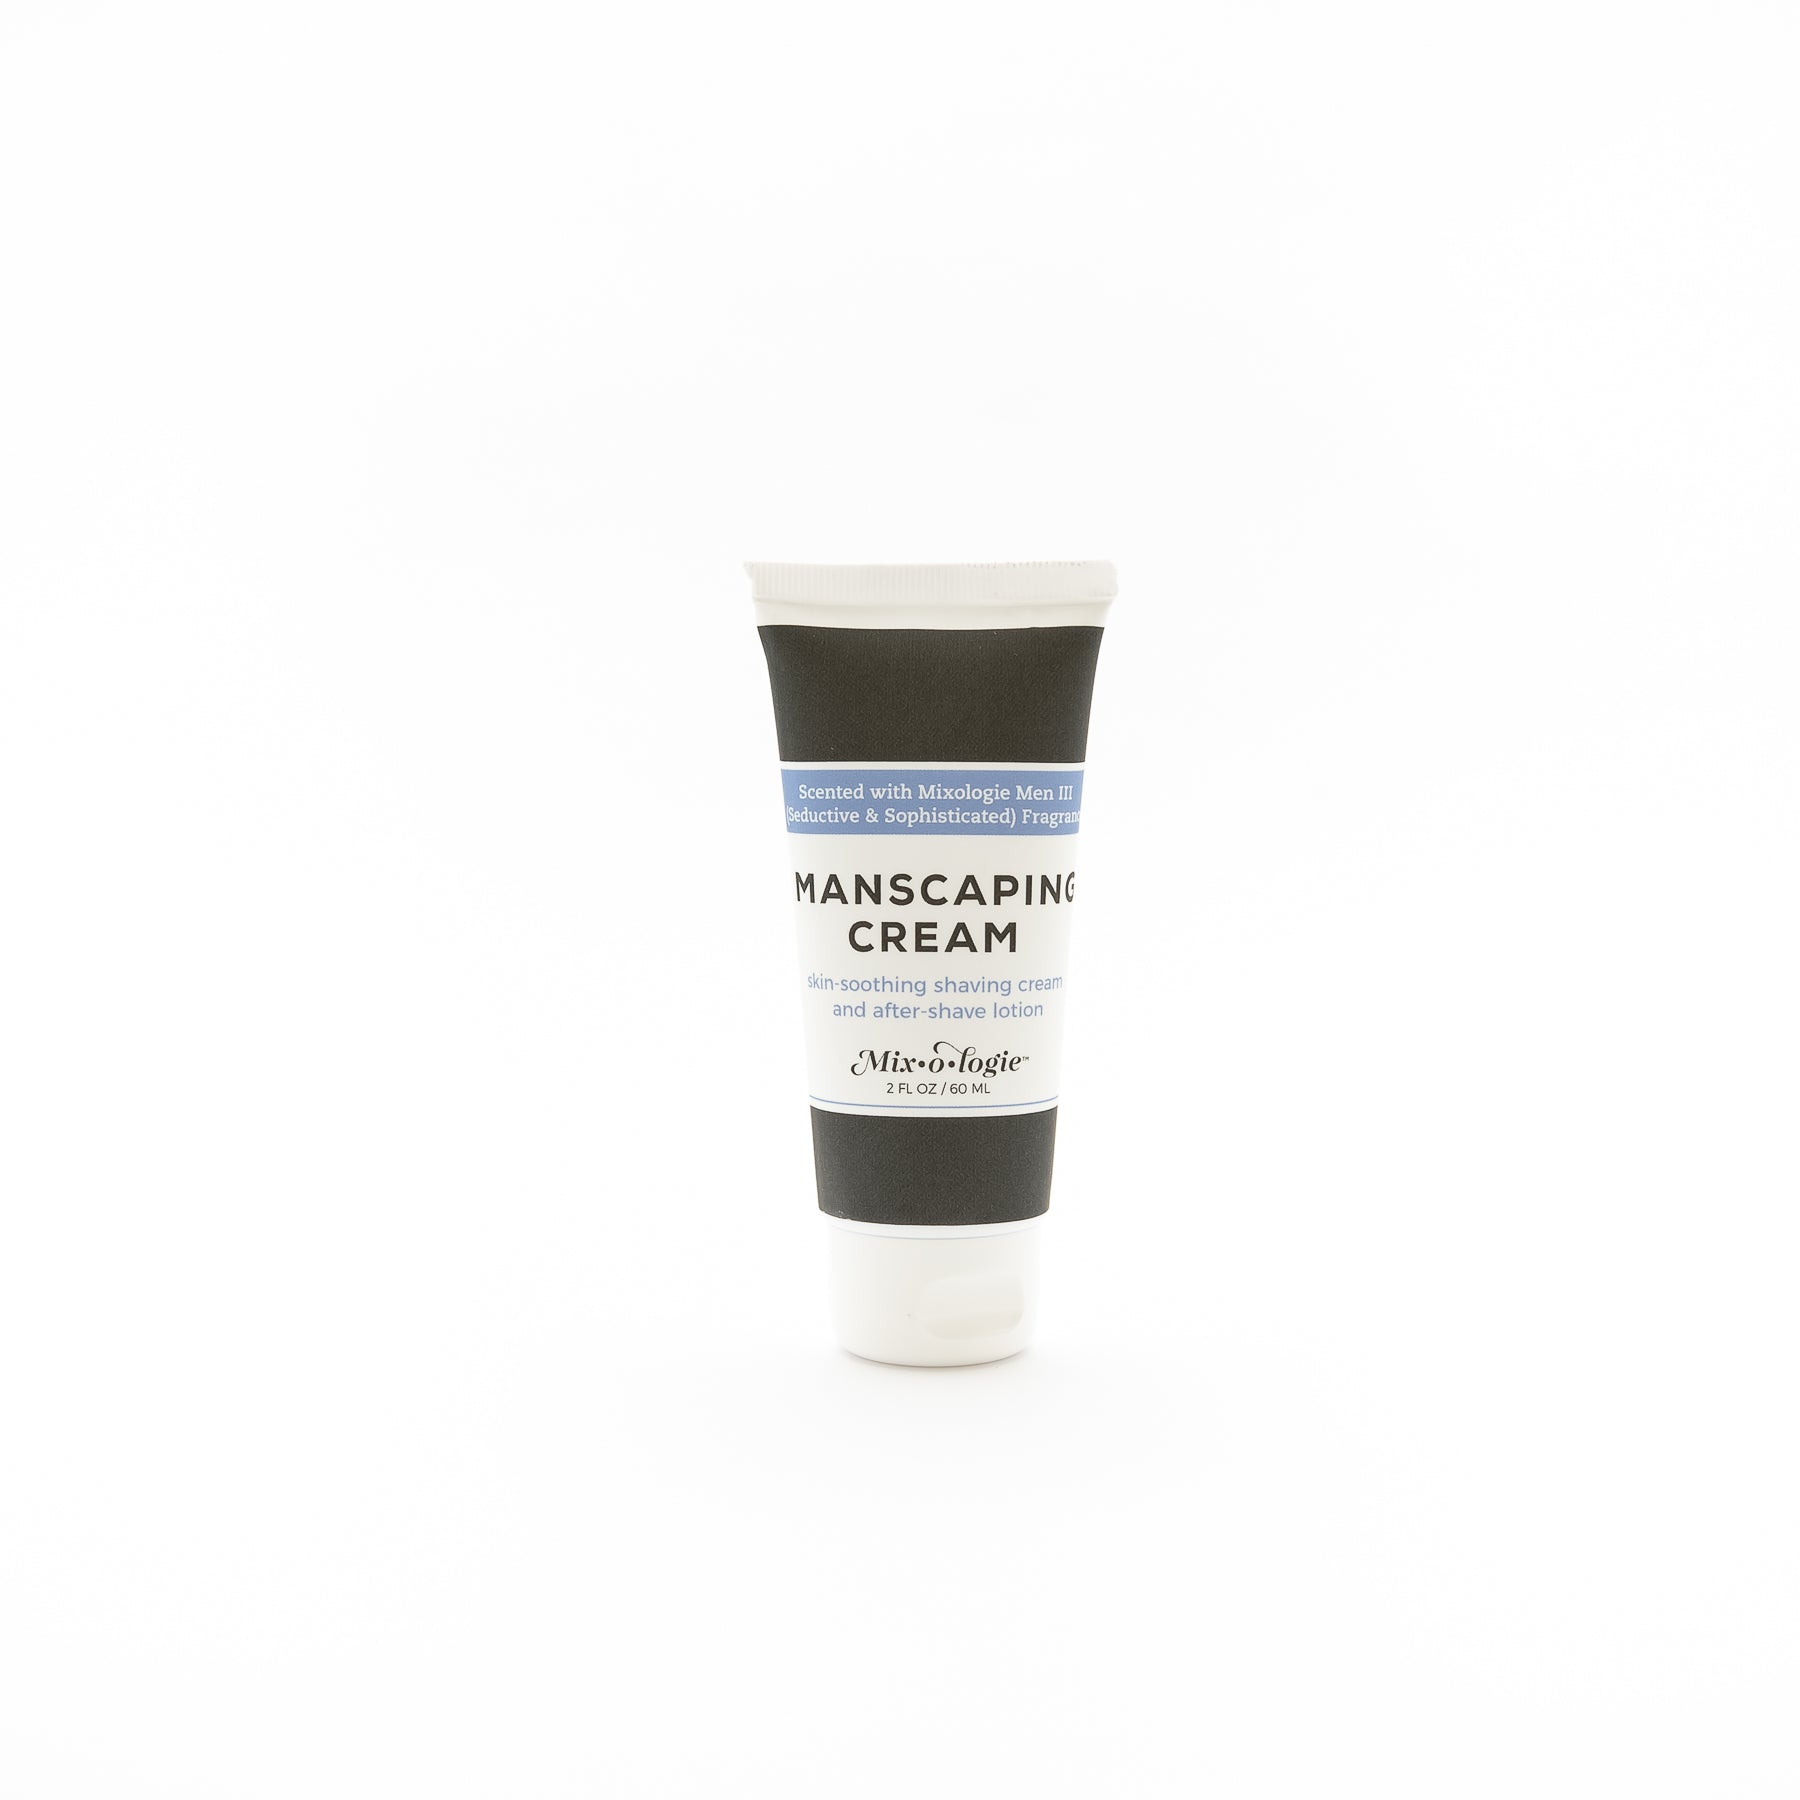 Manscaping cream - Skin smoothing shaving cream and after shave lotion scented with Mixologie's Men's III (Seductive & Sophisticated) fragrance in 60 mL plastic tube.